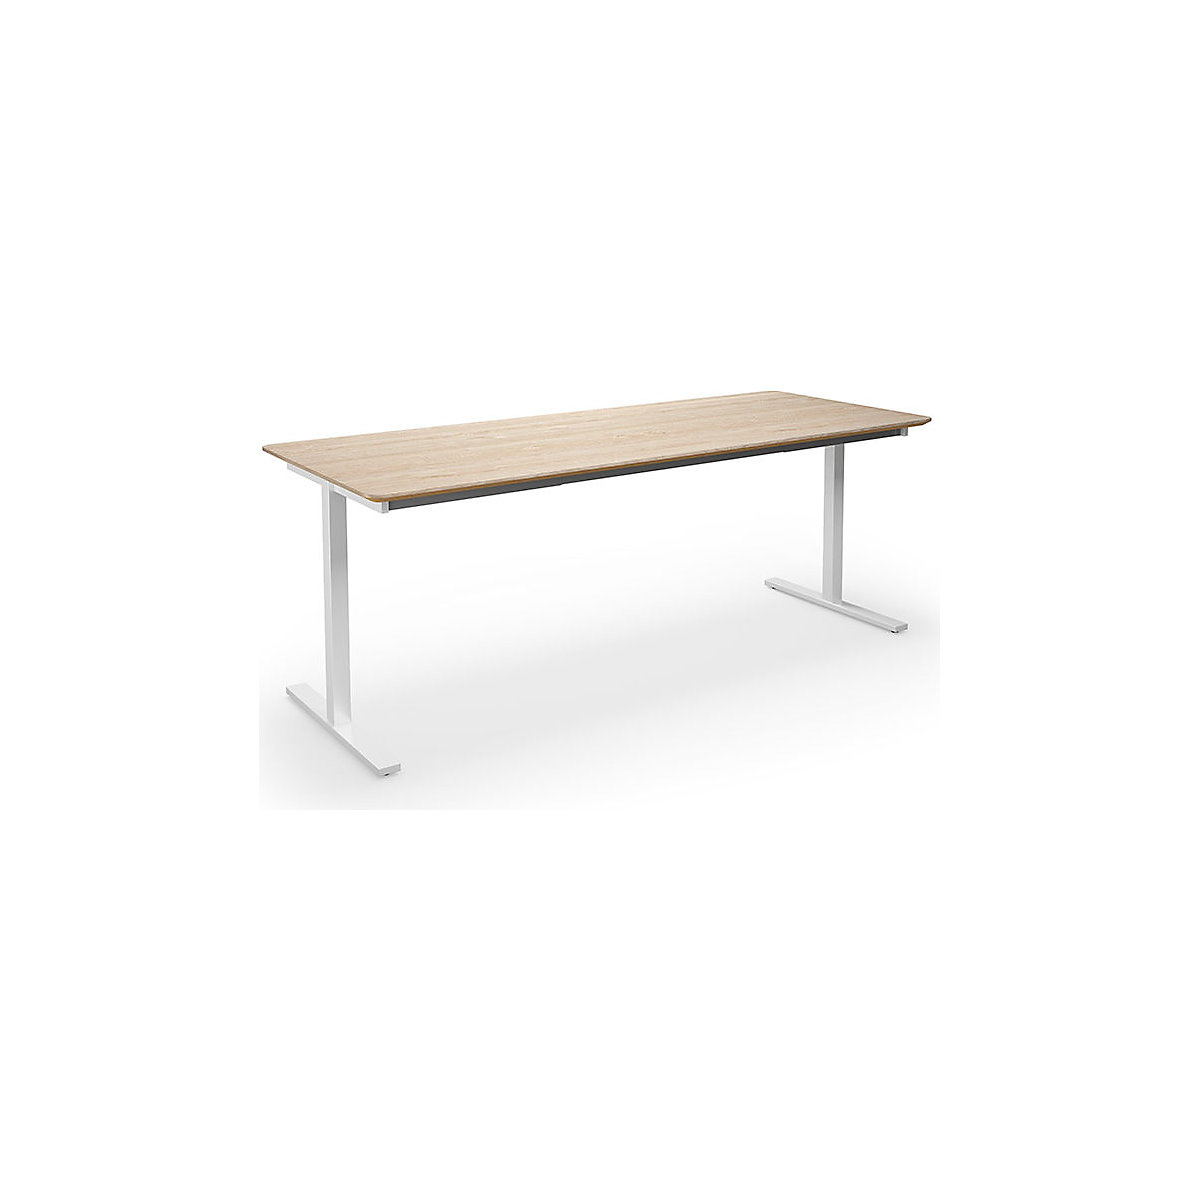 DUO-T Trend multi-purpose desk, straight tabletop, rounded corners, WxD 1800 x 800 mm, oak, white-4